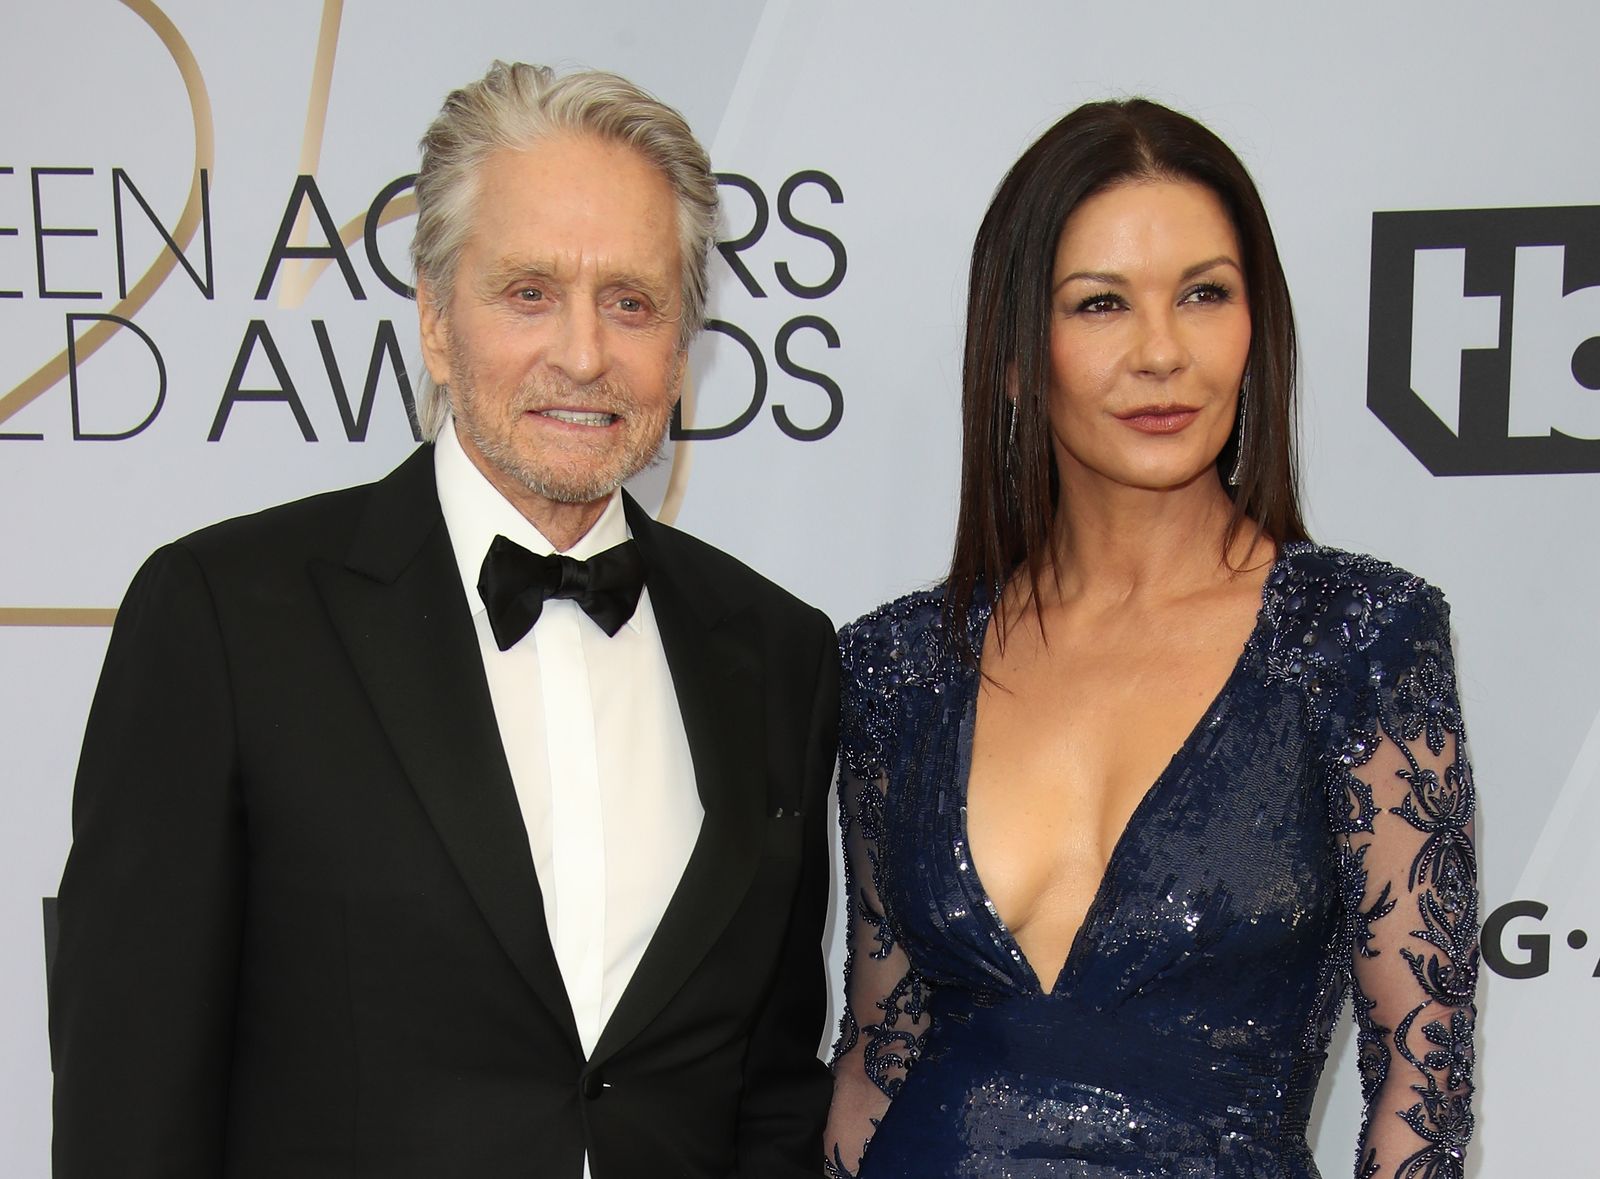 Michael Douglas and Catherine Zeta-Jones at the 25th Annual Screen Actors Guild Awards at The Shrine Auditorium on January 27, 2019 | Photo: Getty Images